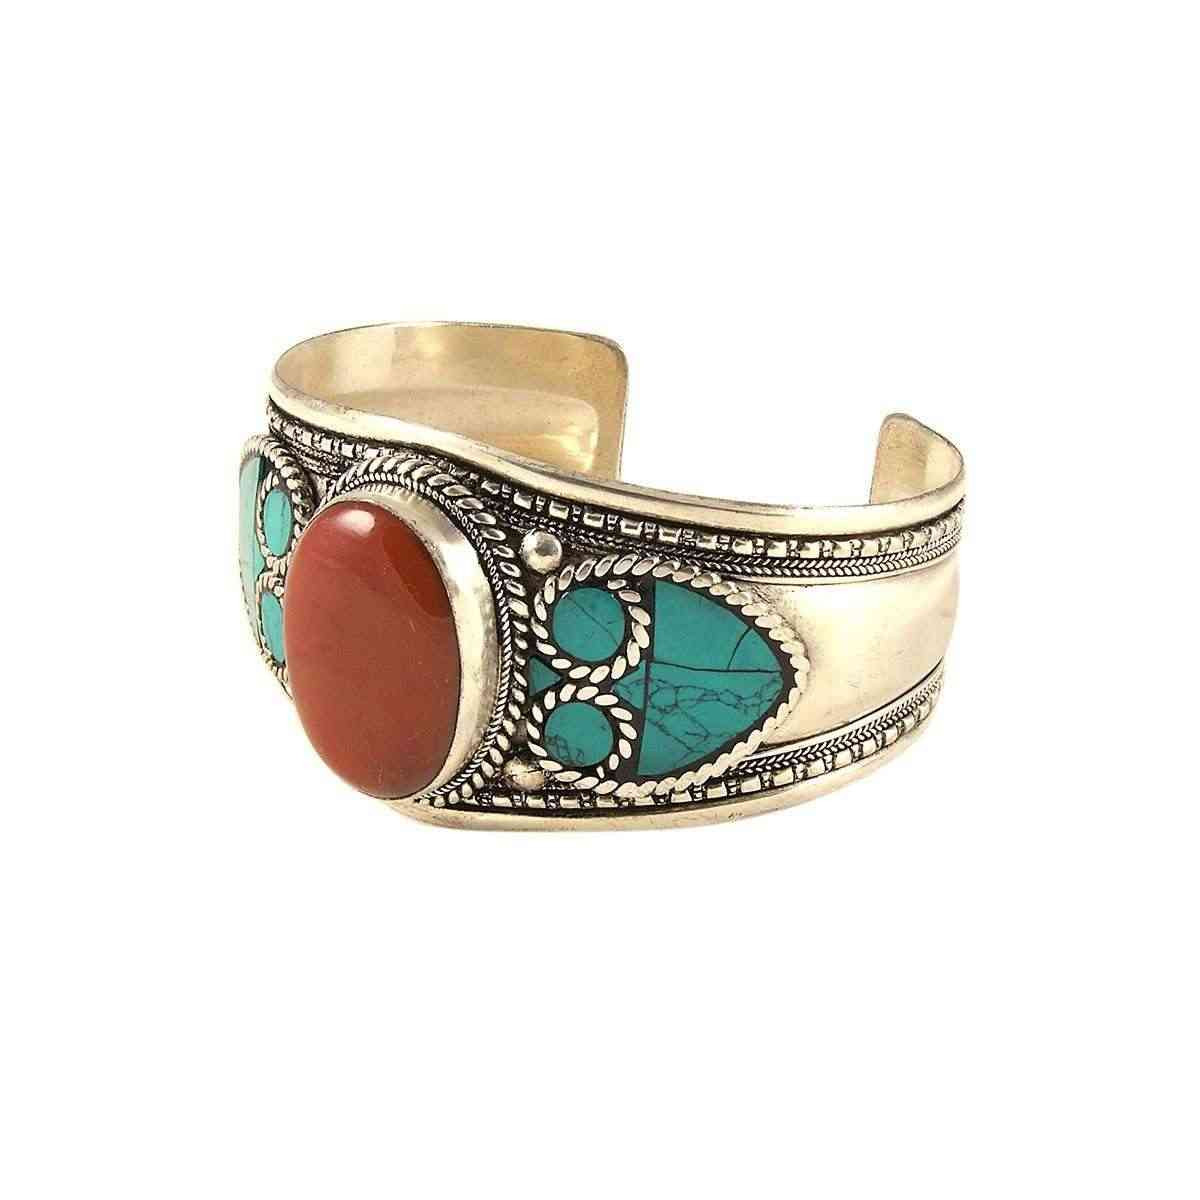 Nepalese Bangle - Single Red Stone - Wide